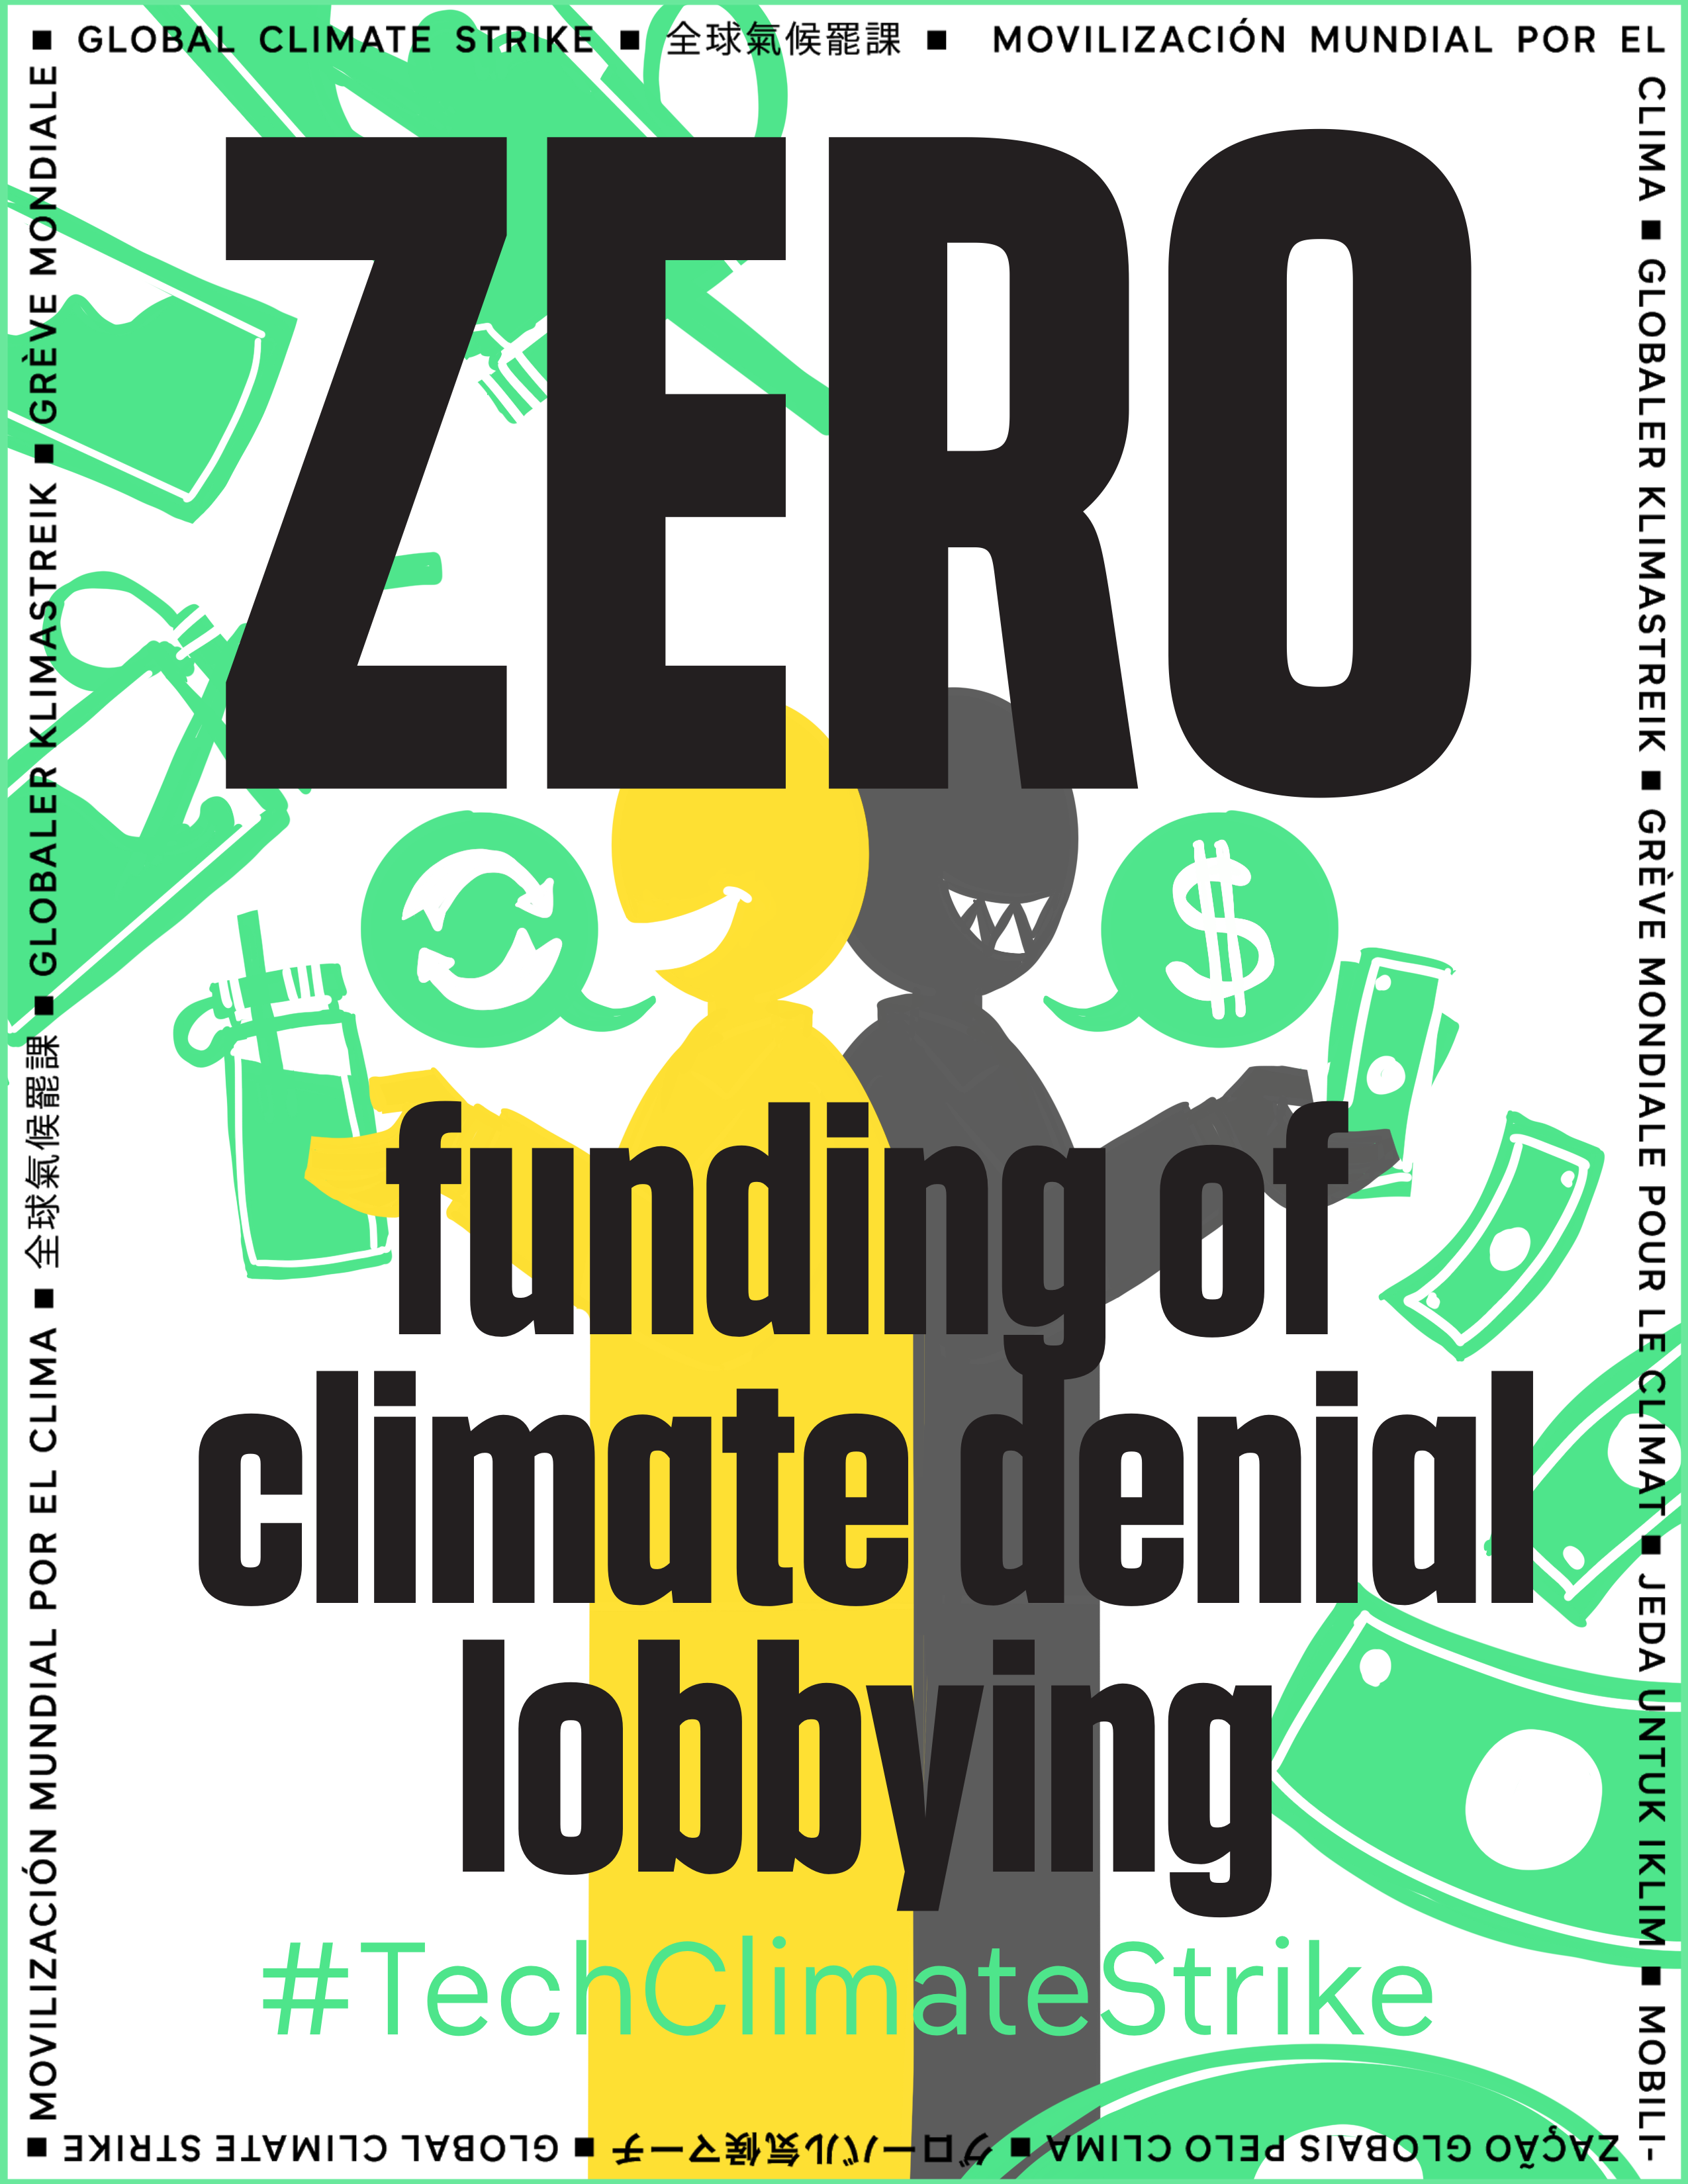 Zero funding of climate denial lobbying or other efforts